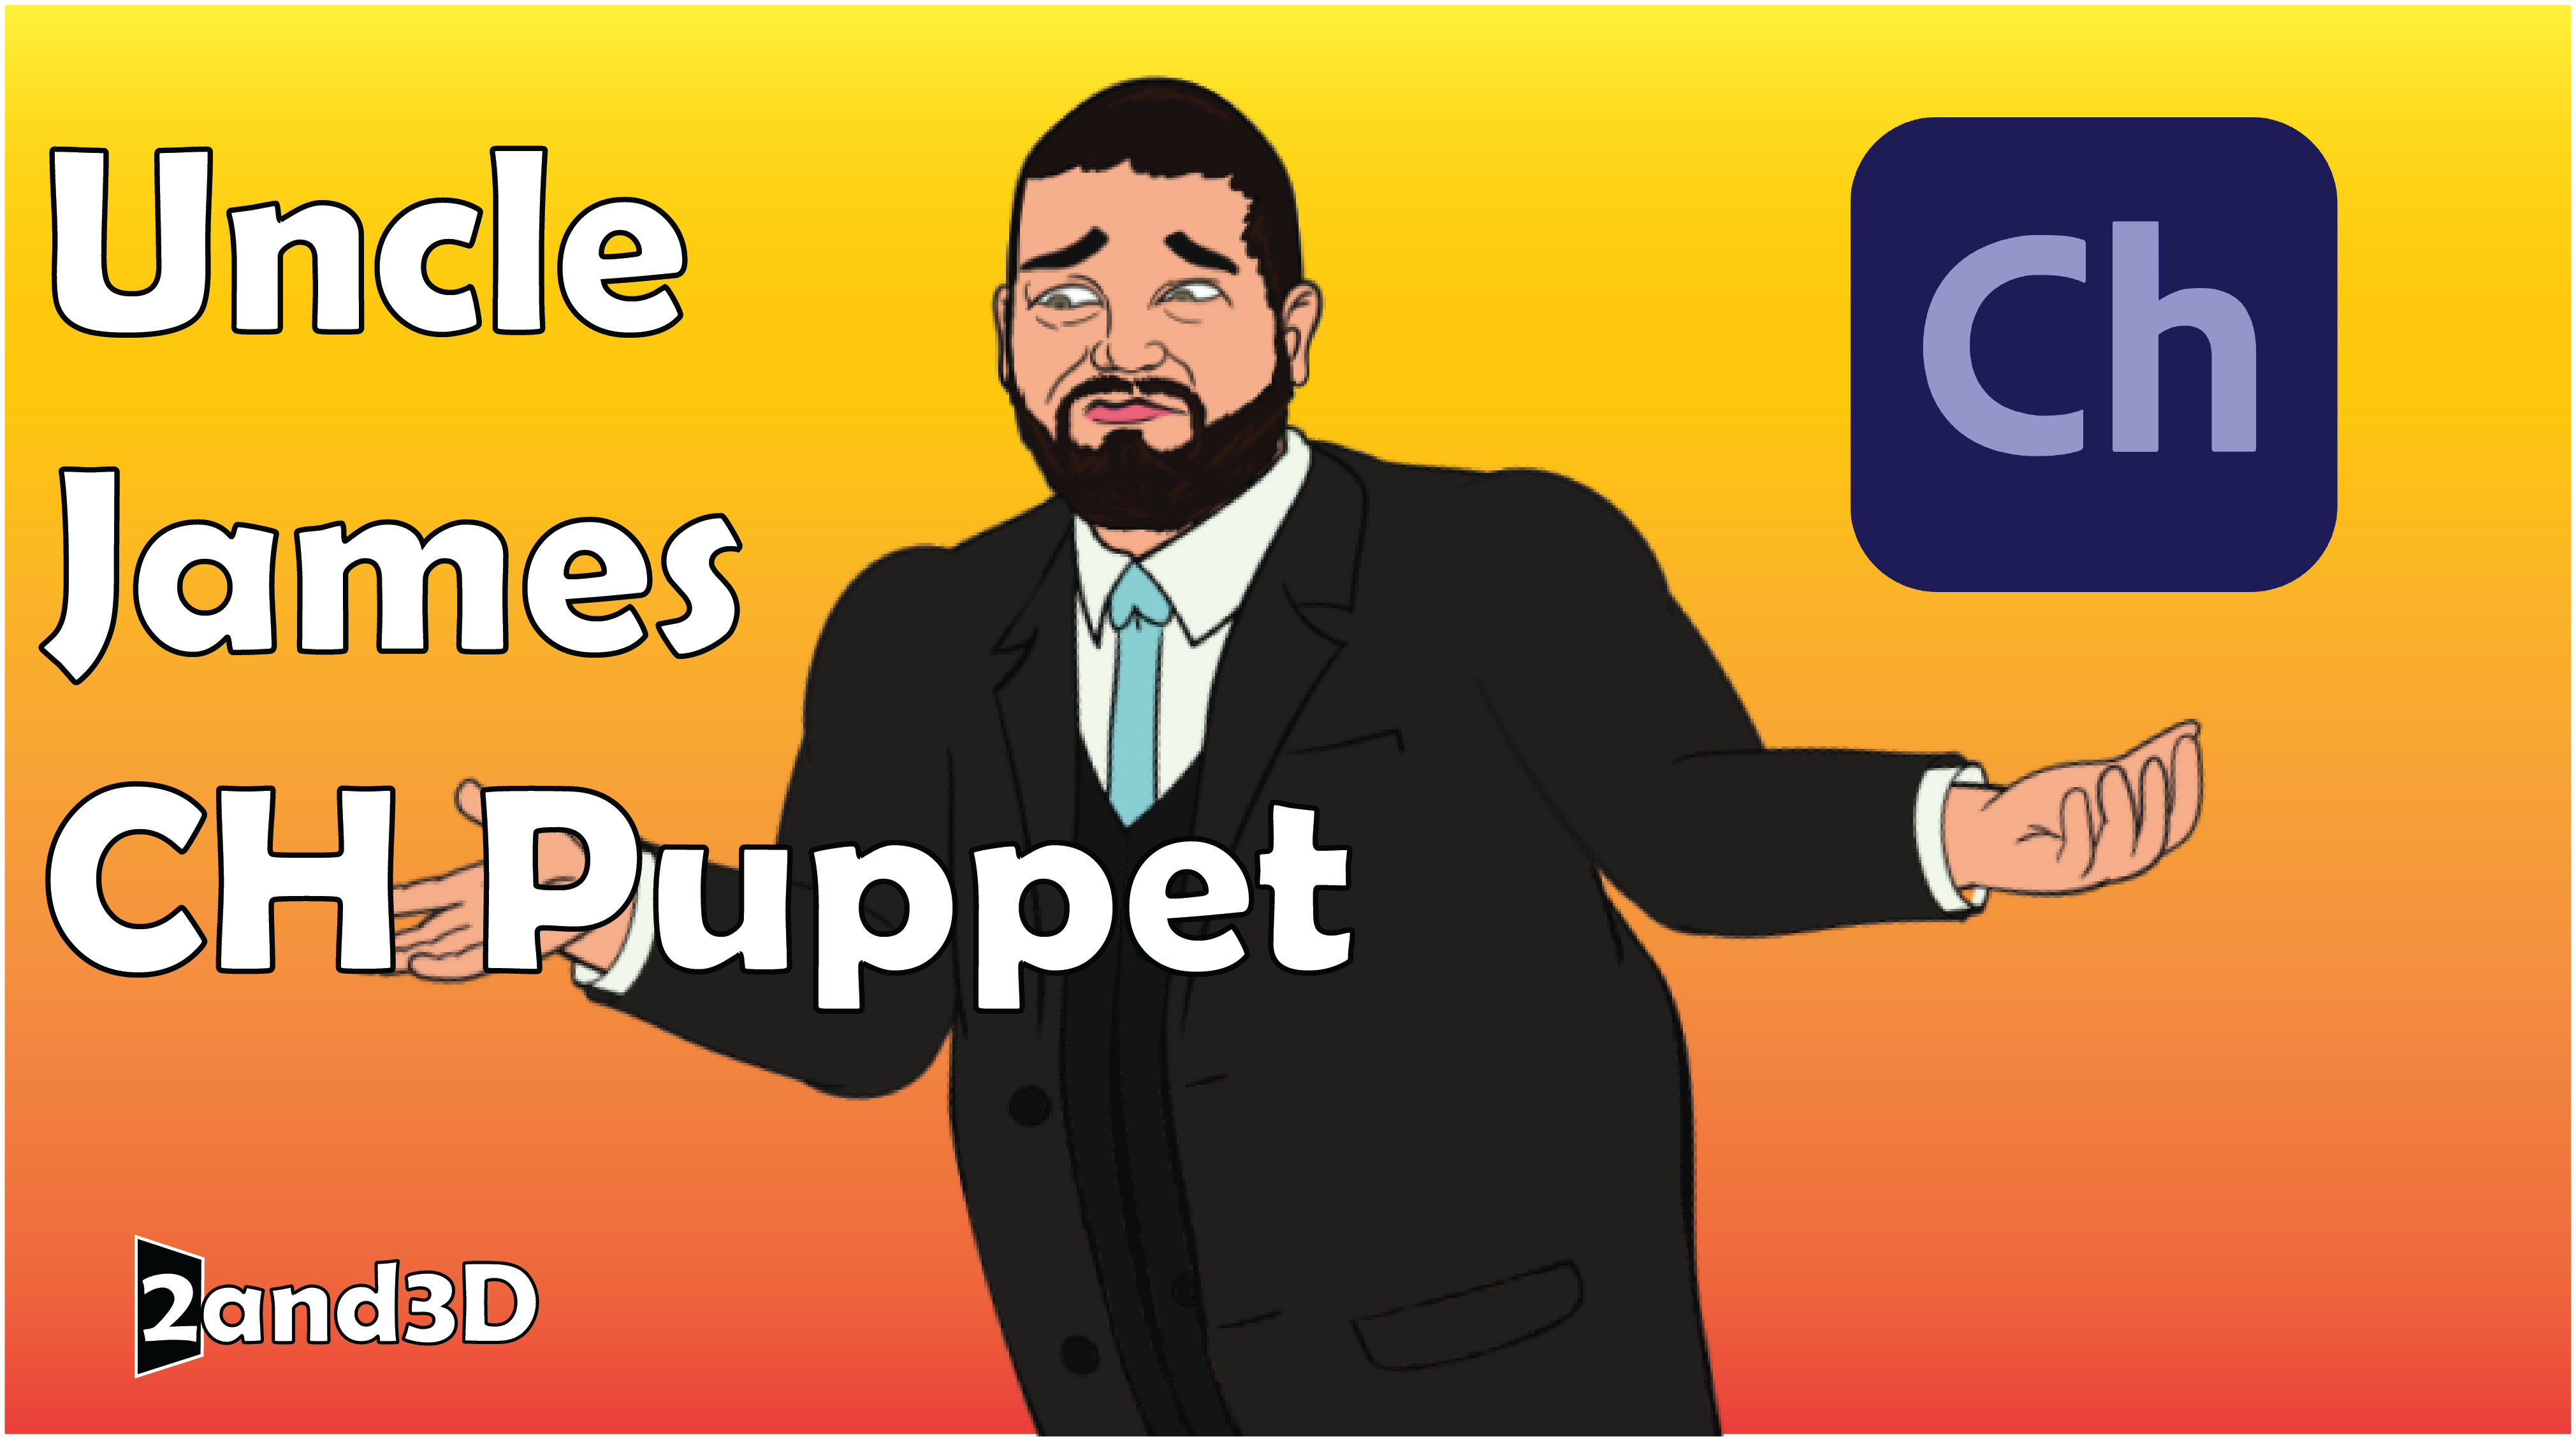 Uncle James Adobe CH Puppet (Adobe Character Animator Puppet) Adobe Character Animator Puppet Adobe Ch Puppet